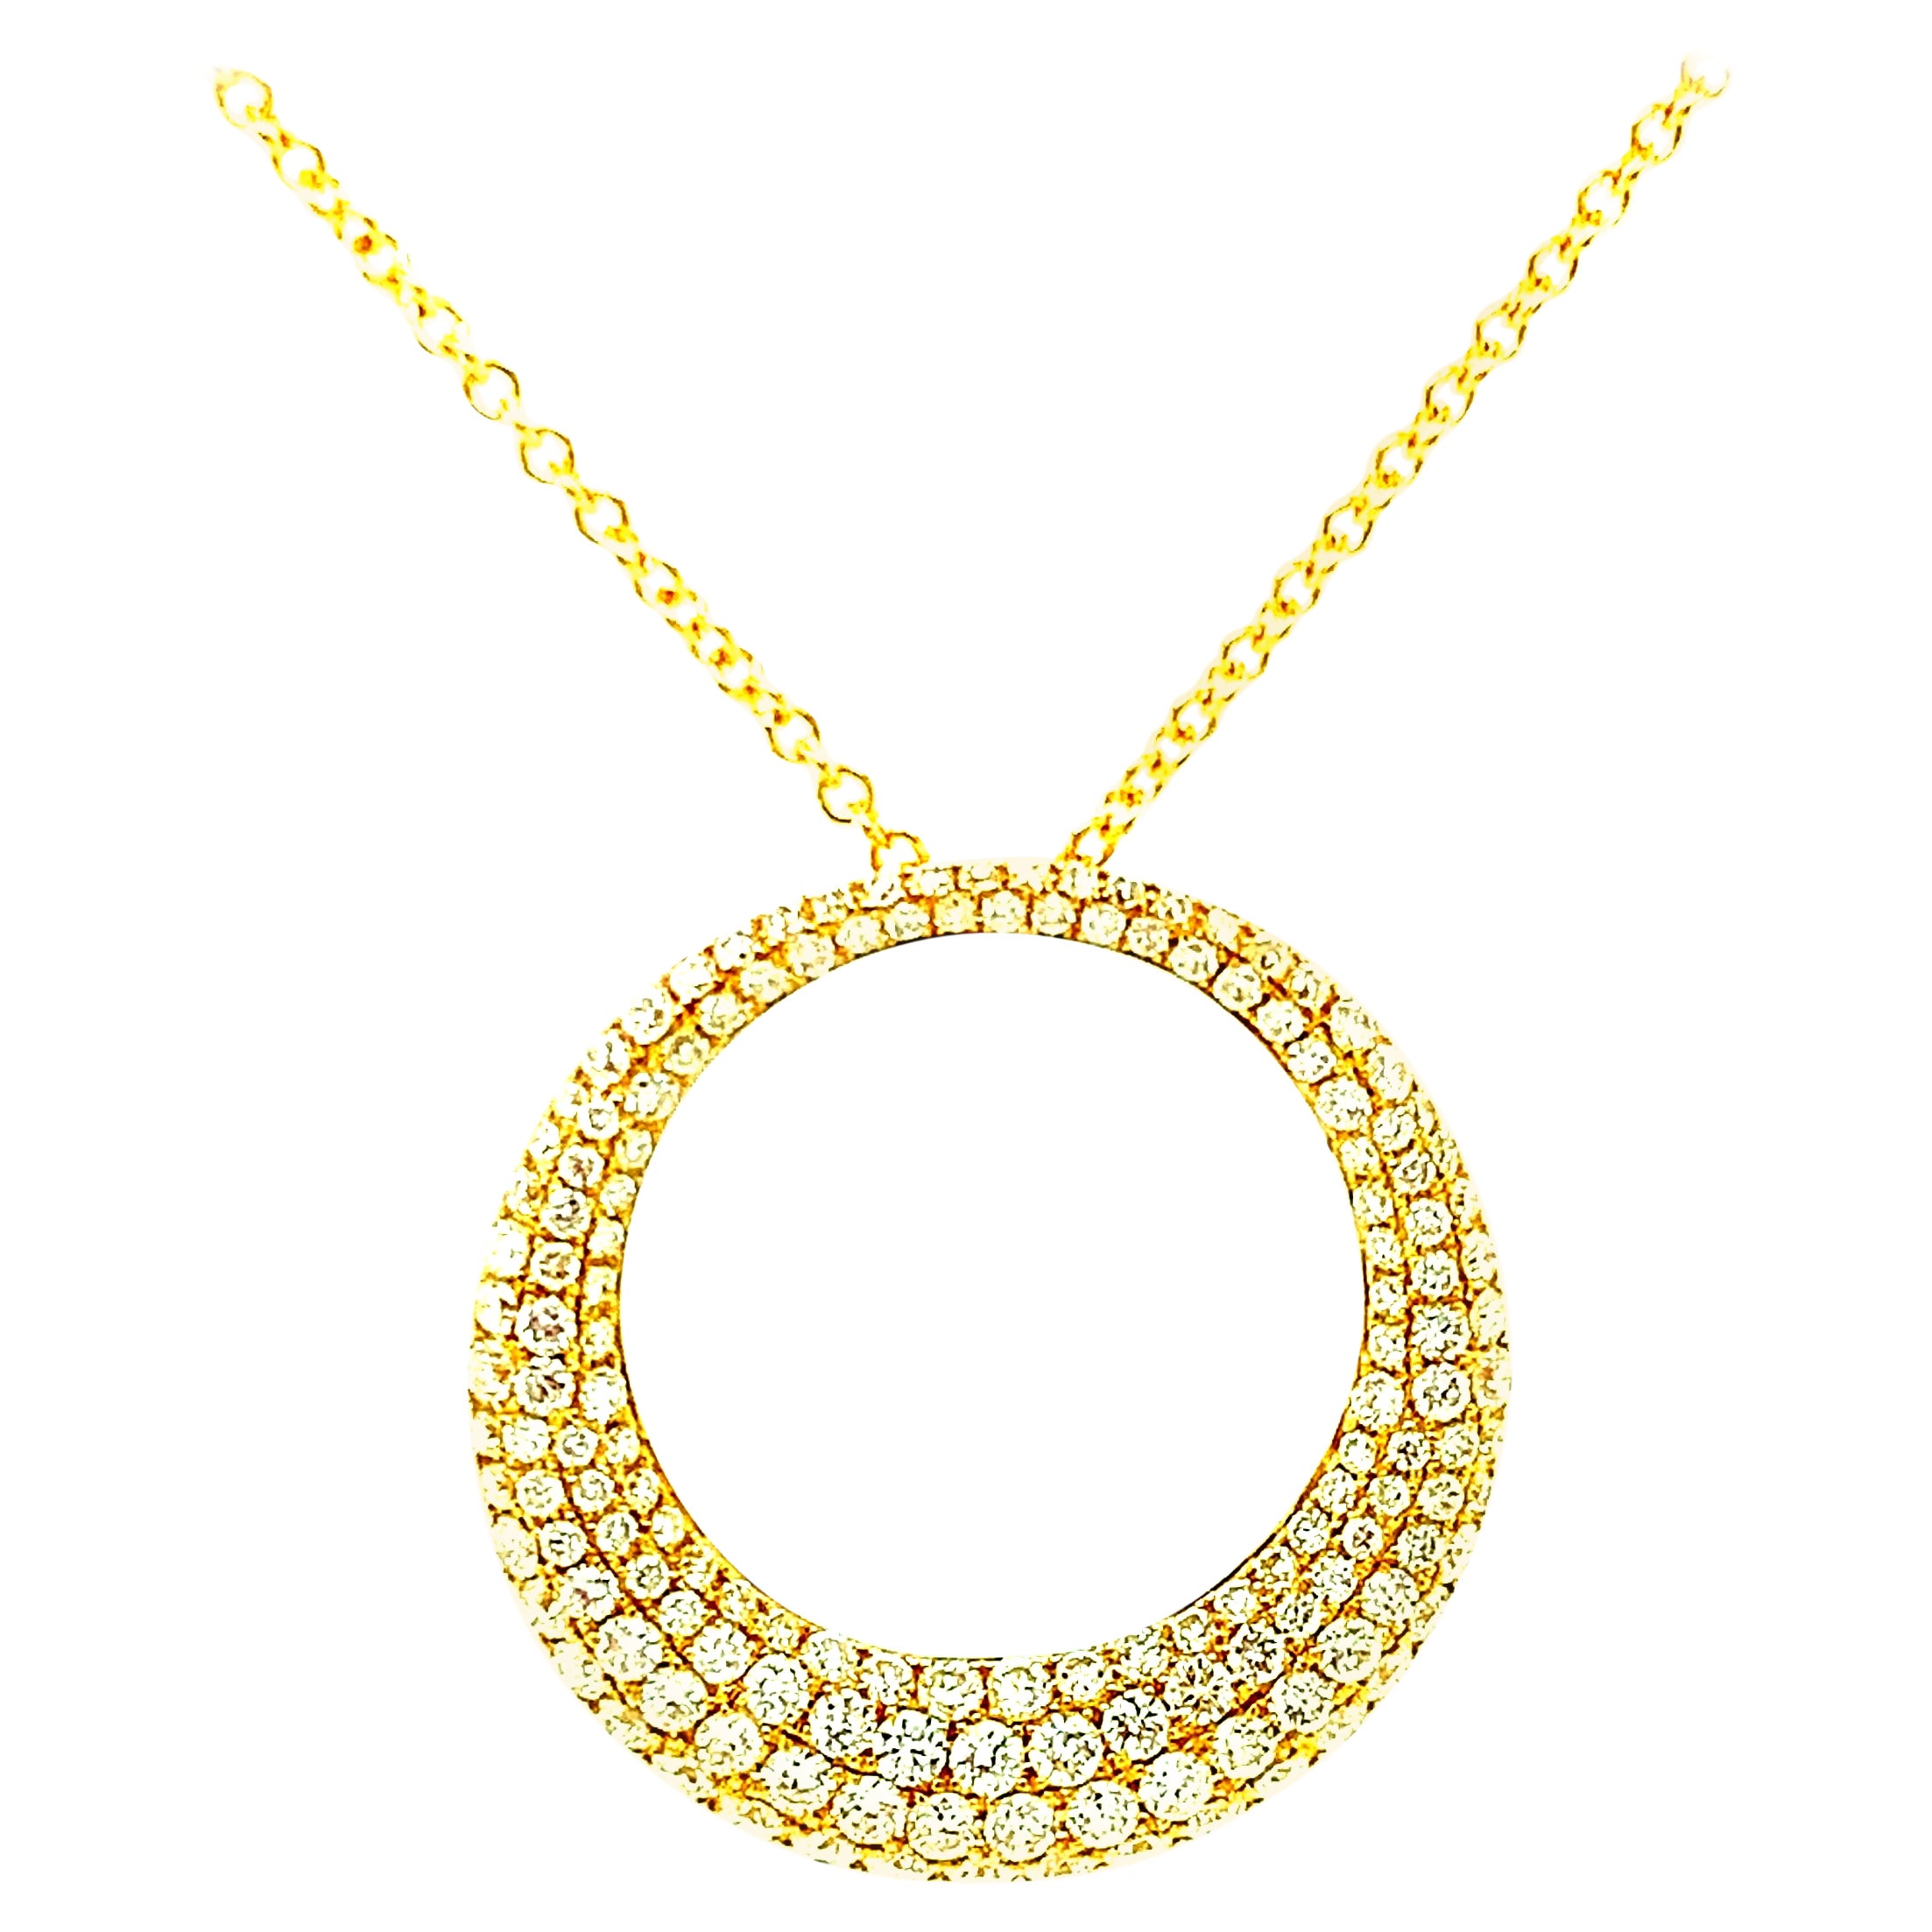 Diamond Pave and 18k Yellow Gold "O" Slide Necklace, 1.66 Carats Total 